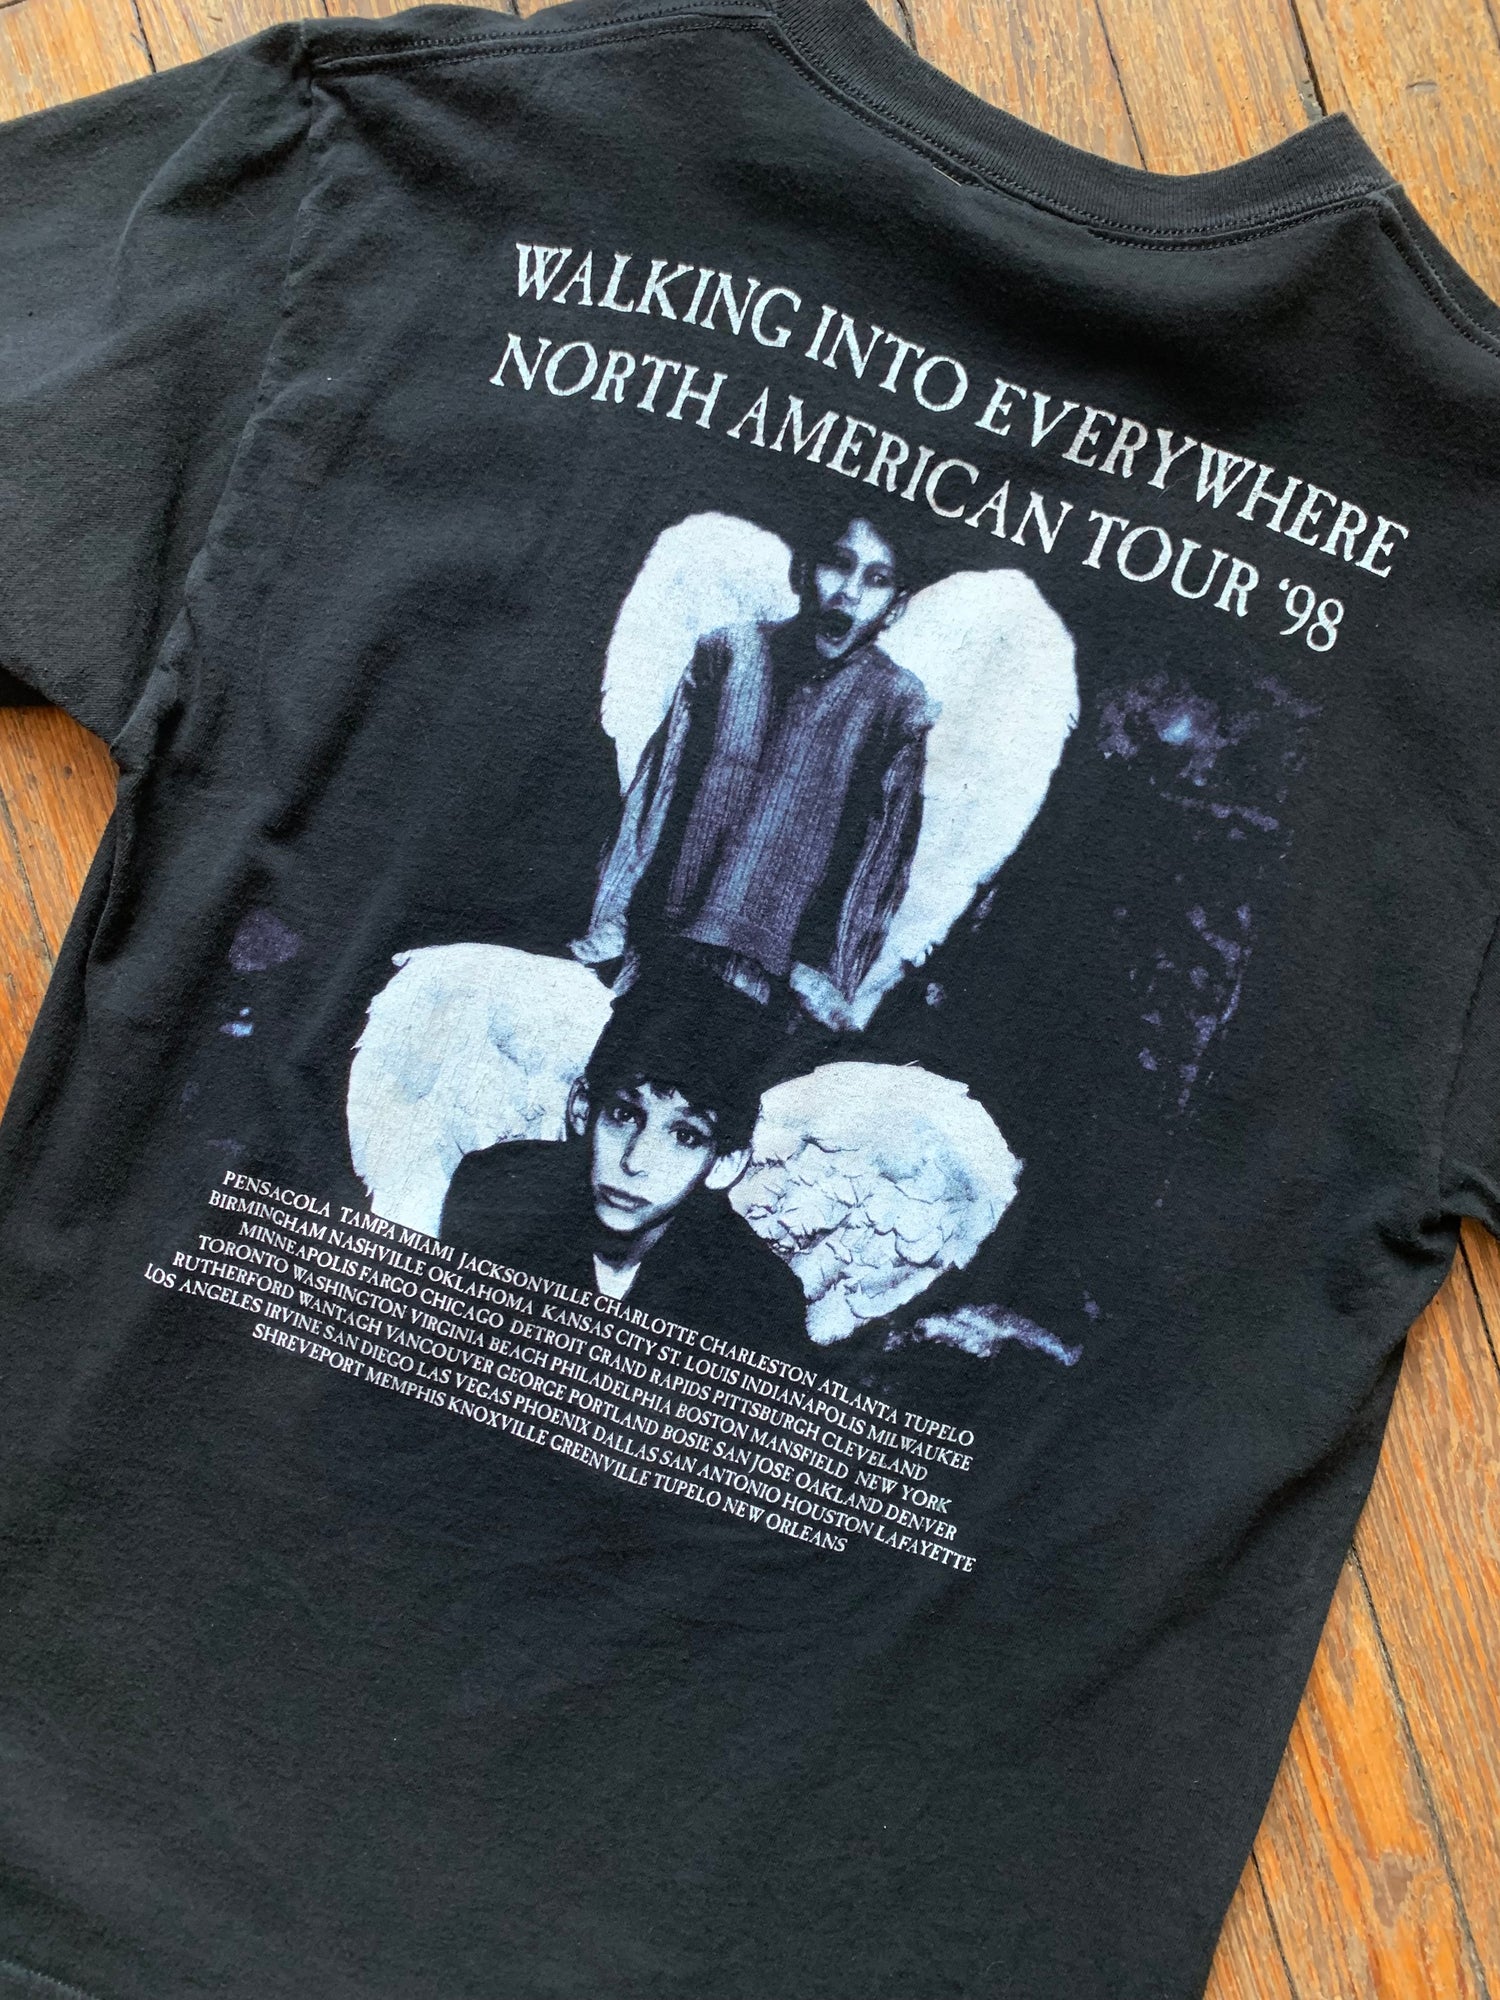 Vintage Jimmy Page & Robert Plant 98’ Walking Into Everywhere Tour T-S